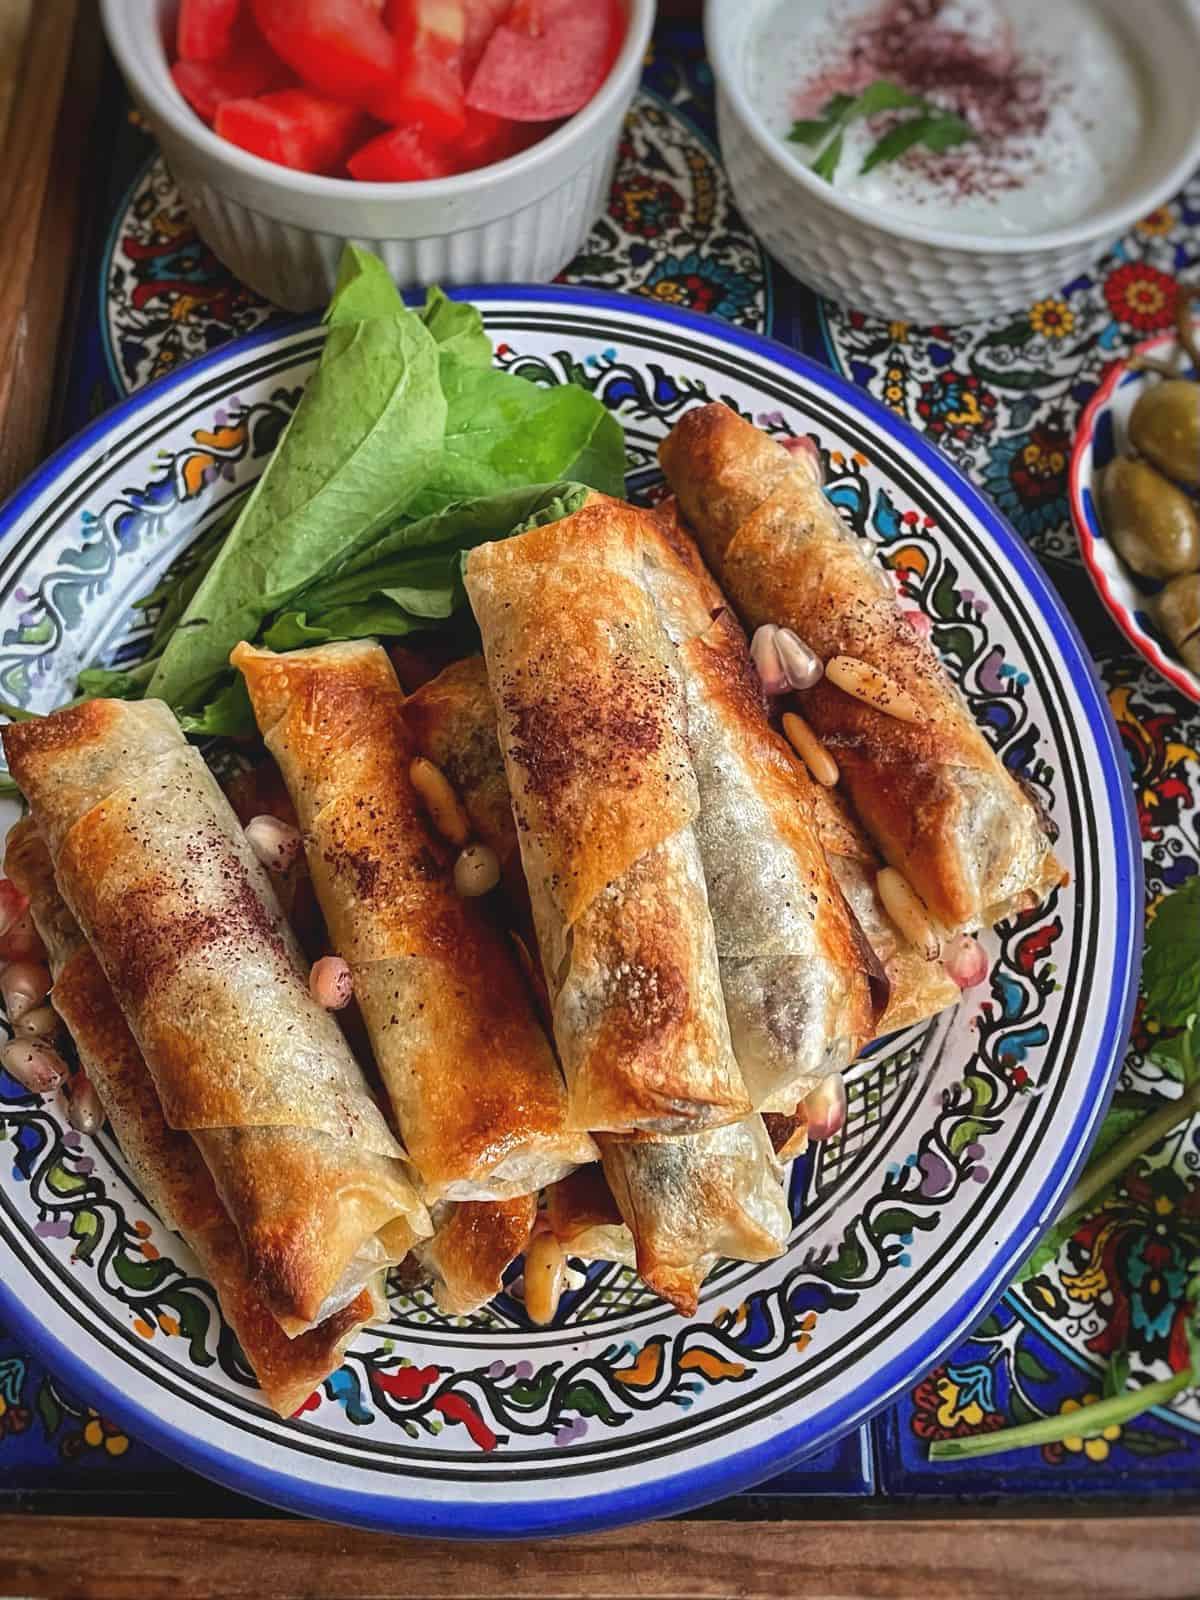 Sumac chicken rolls in a plate with salad. 